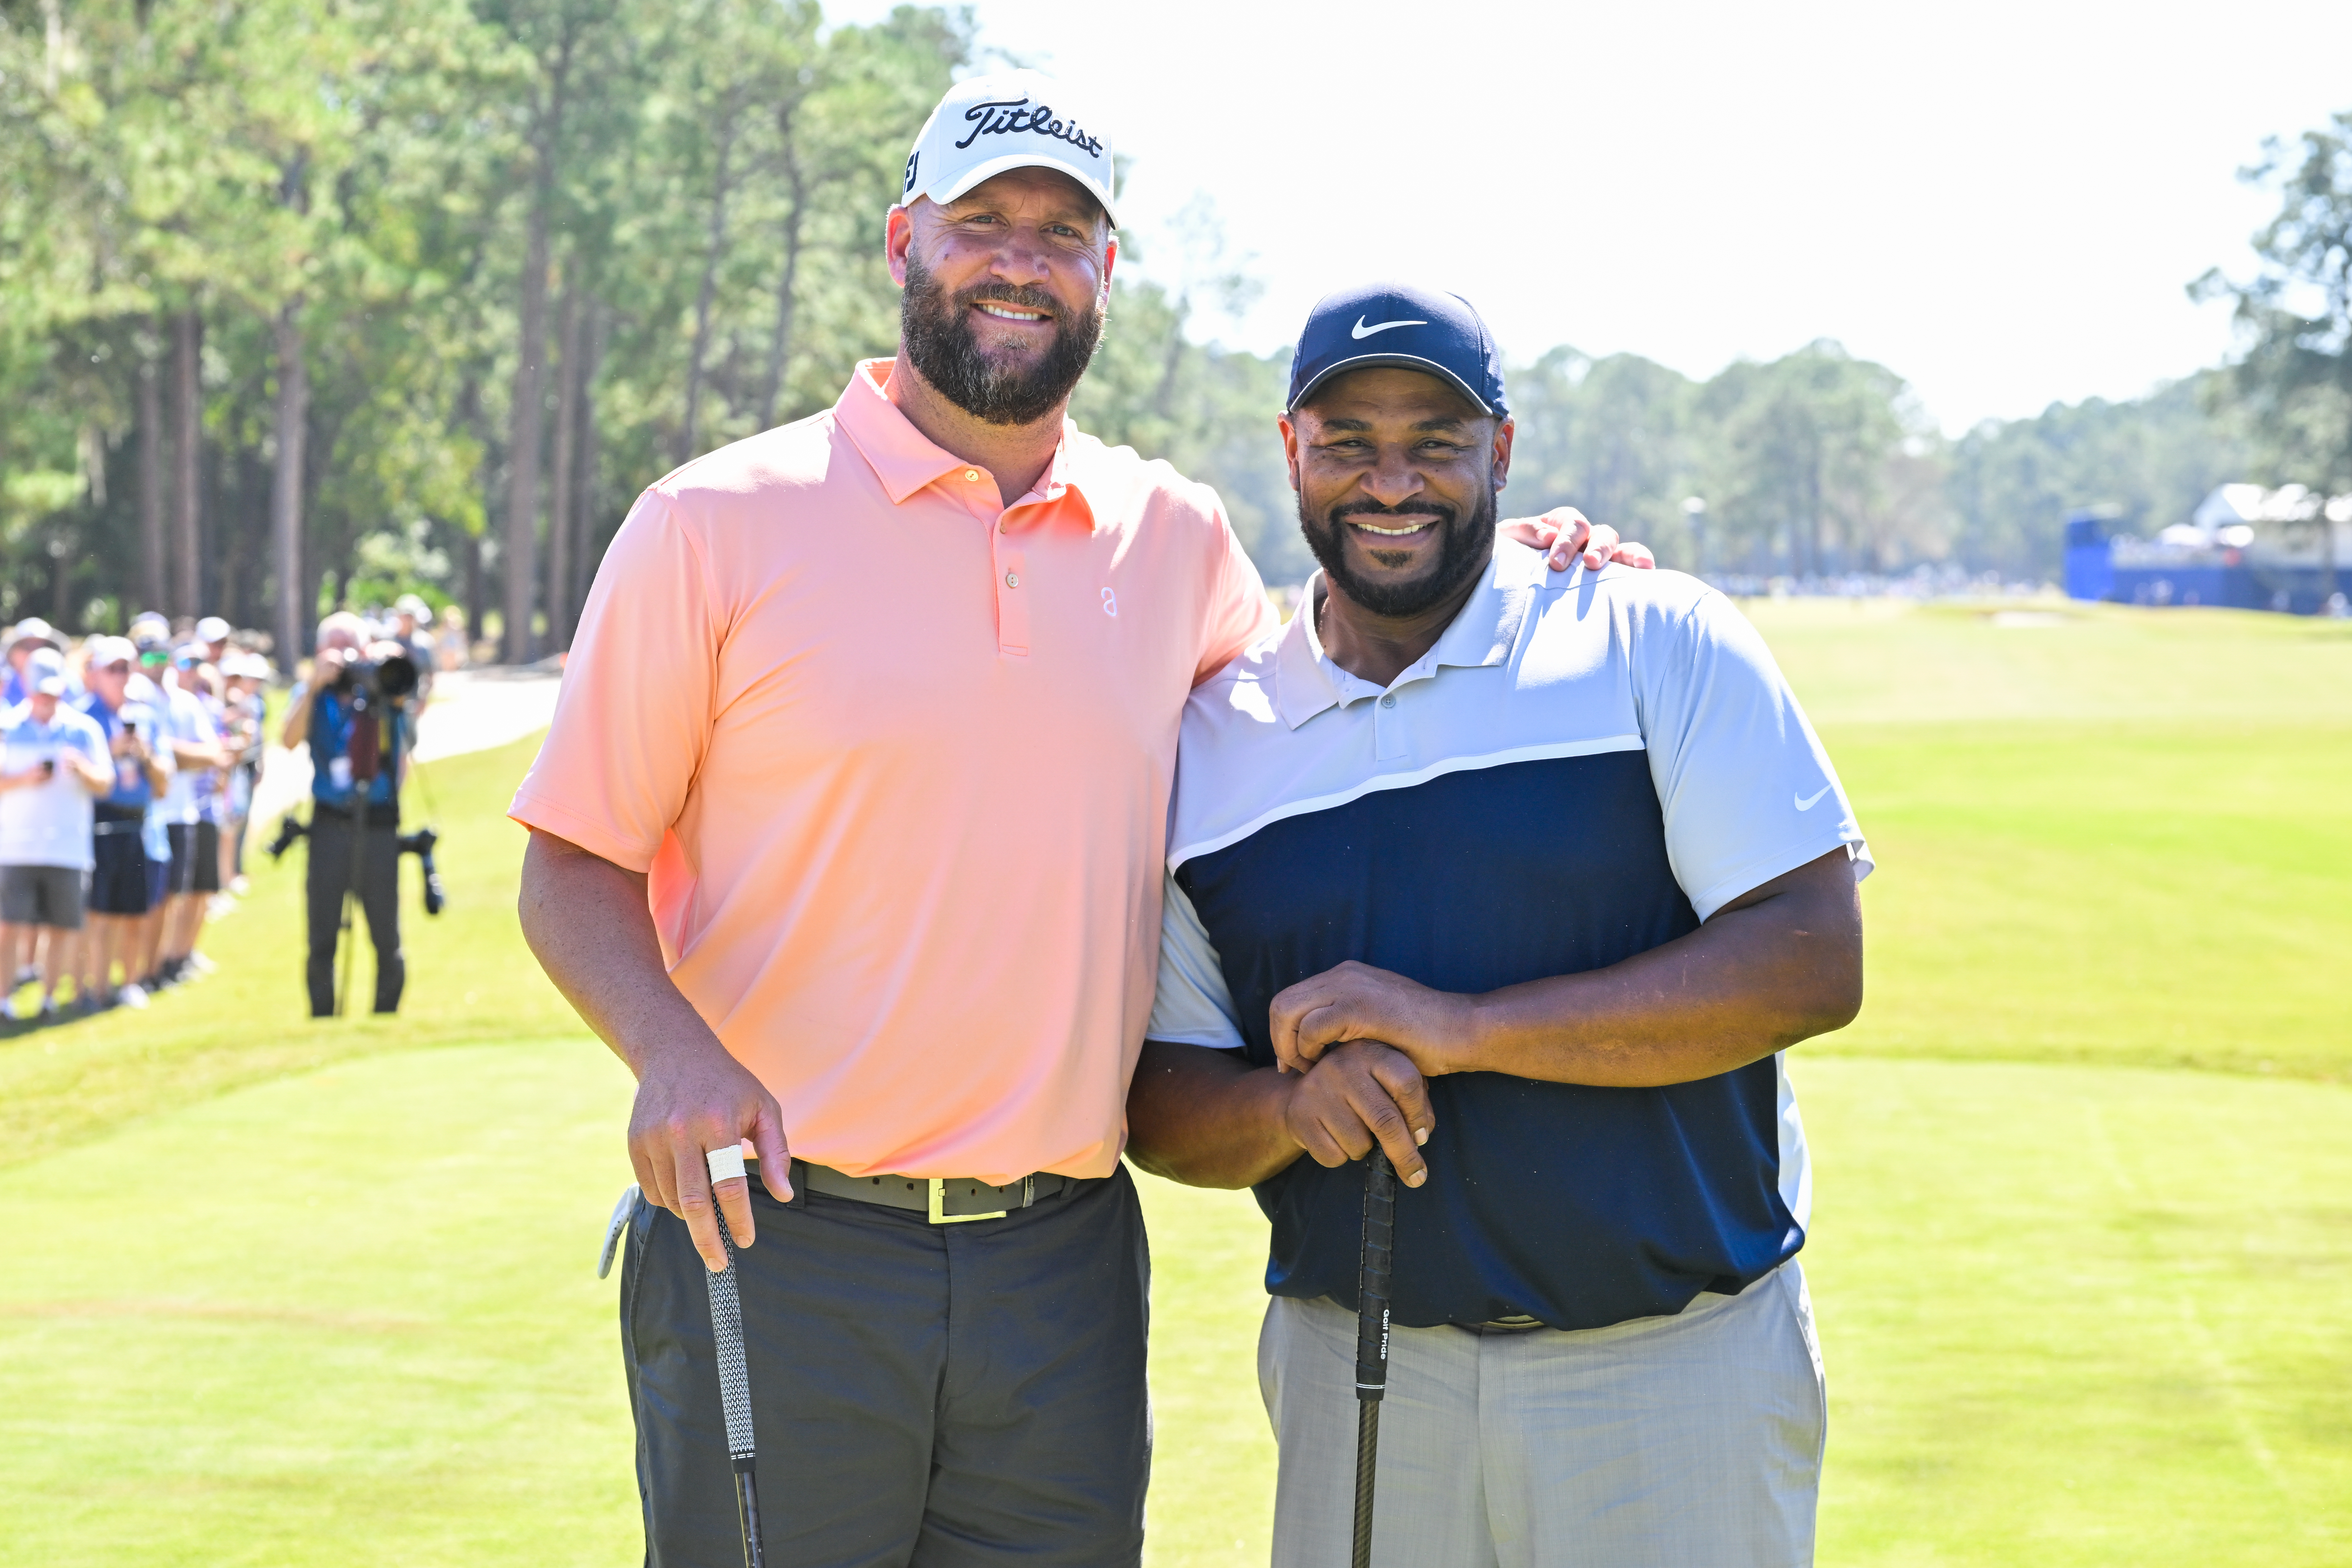 Ben Roethlisberger and Jerome Bettis stand together on the 10th tee box during the first round of the PGA TOUR Champions Constellation FURYK &amp; FRIENDS presented by Circle K at Timuquana Country Club on October 7, 2022 in Jacksonville, Florida.